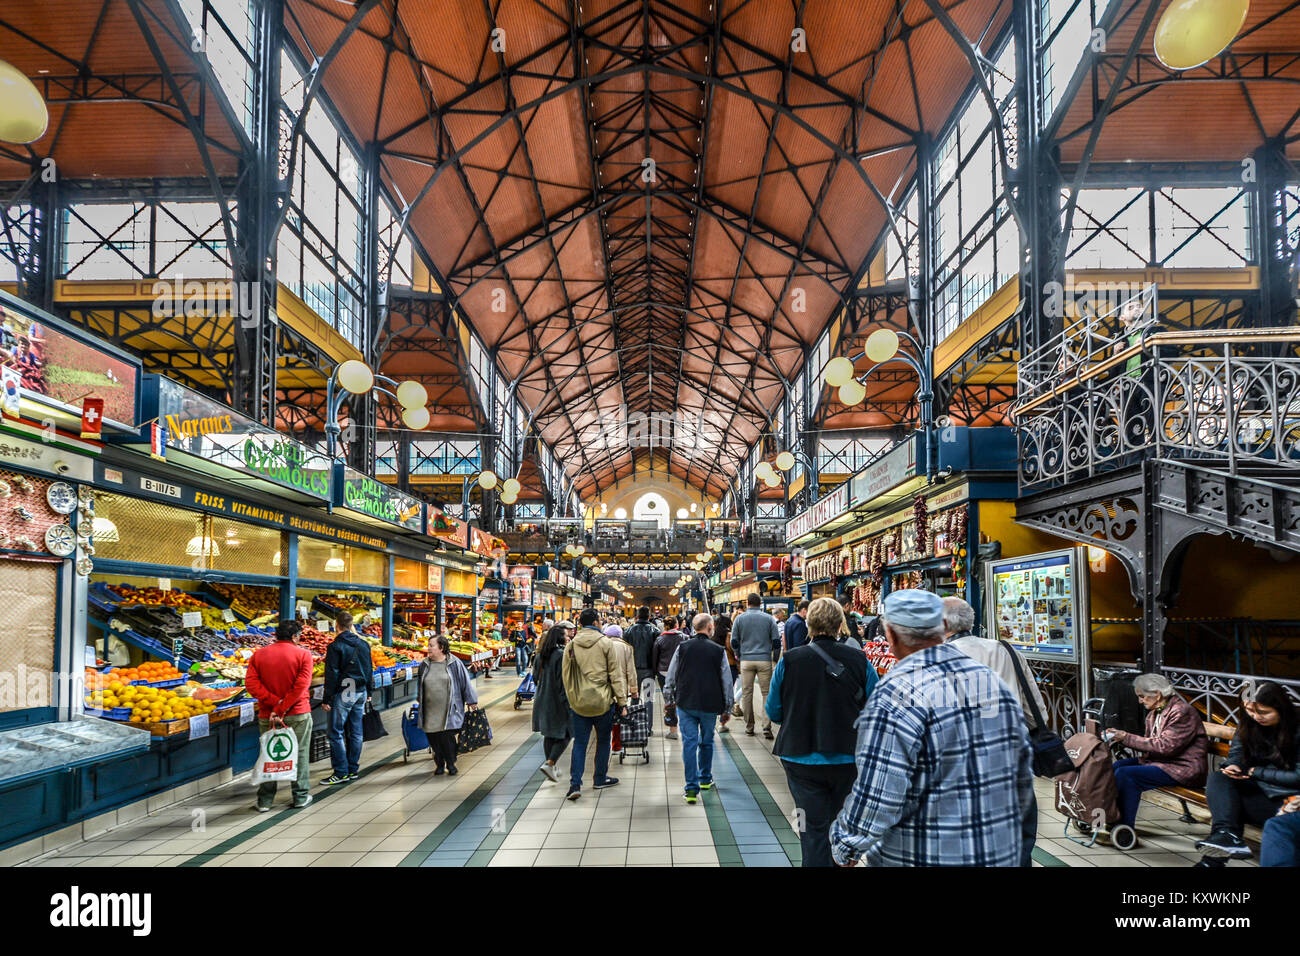 The Central Great Market Hall in Budapest Hungary selling groceries, produce and souvenirs with locals and tourists walking on the lower level Stock Photo